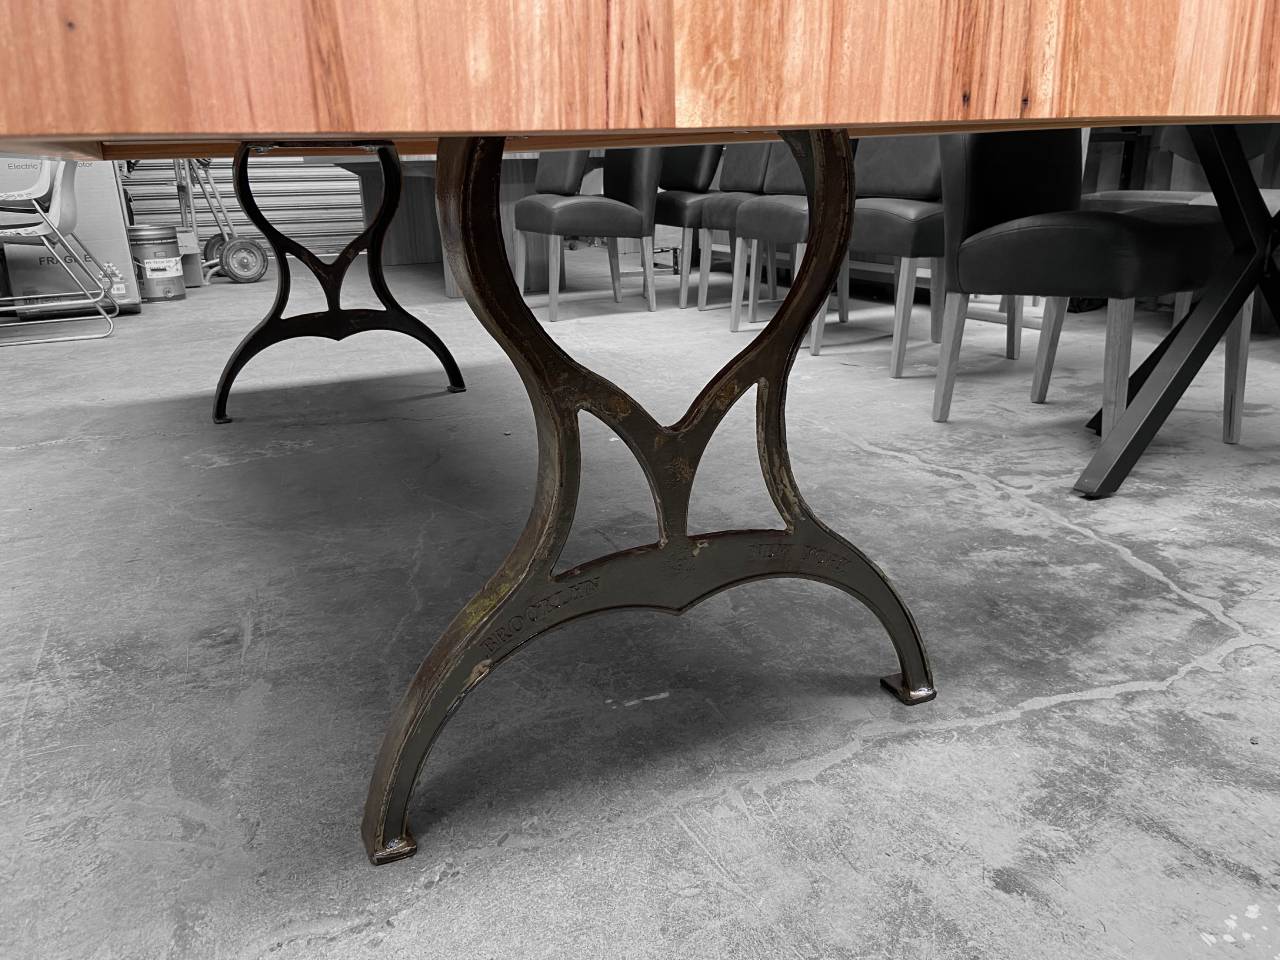 KT 10/12 Seater Dining Table Blackbutt Timber 2 Pack Polyurethane Cast Iron Base Quality Furniture Made in Adelaide, South Australia